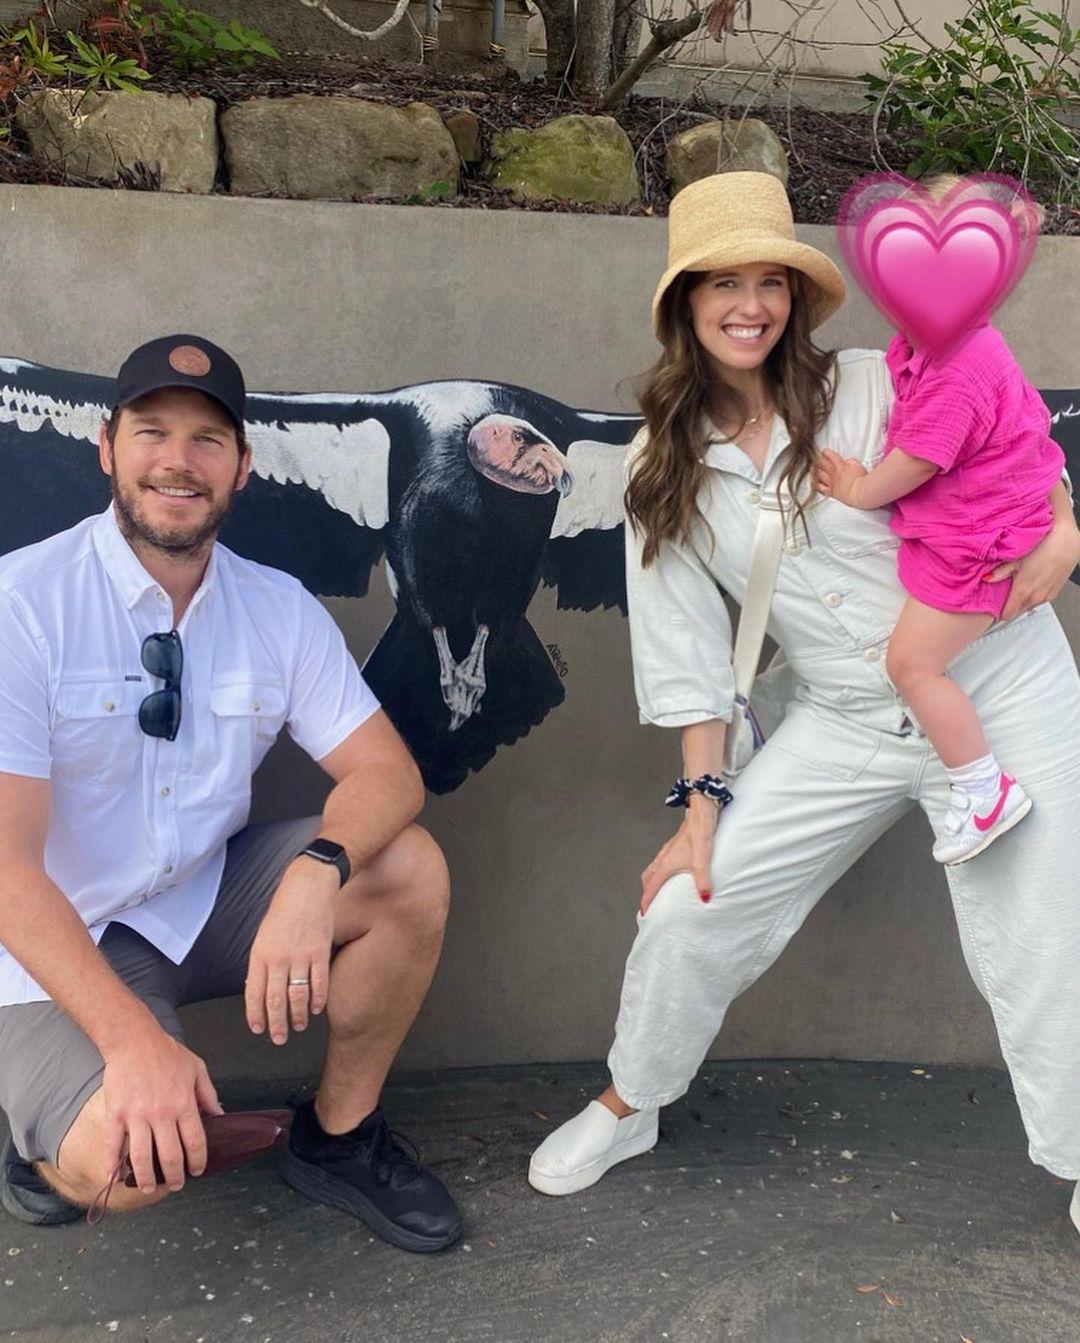 Chris Pratt and his wife and daughter